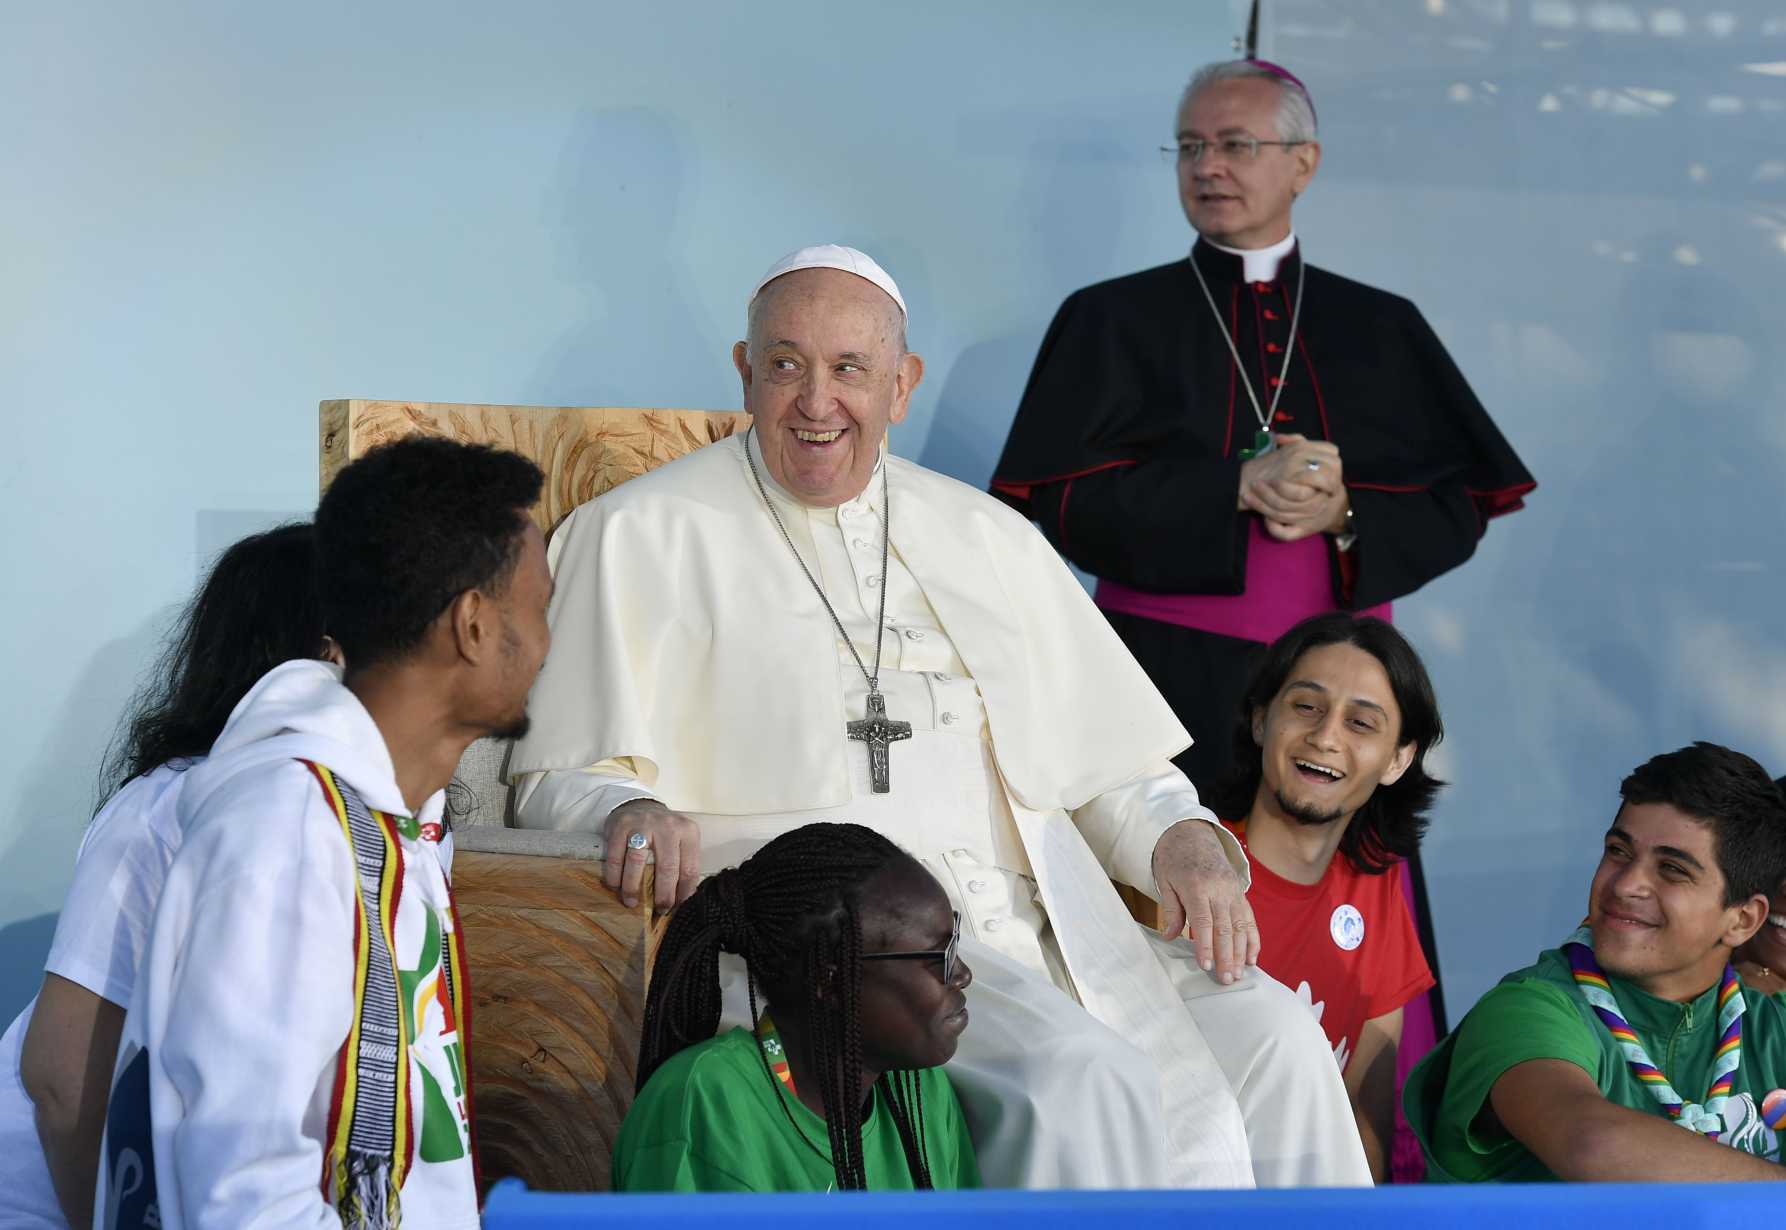 Young people are the living hope of a missionary church, pope says